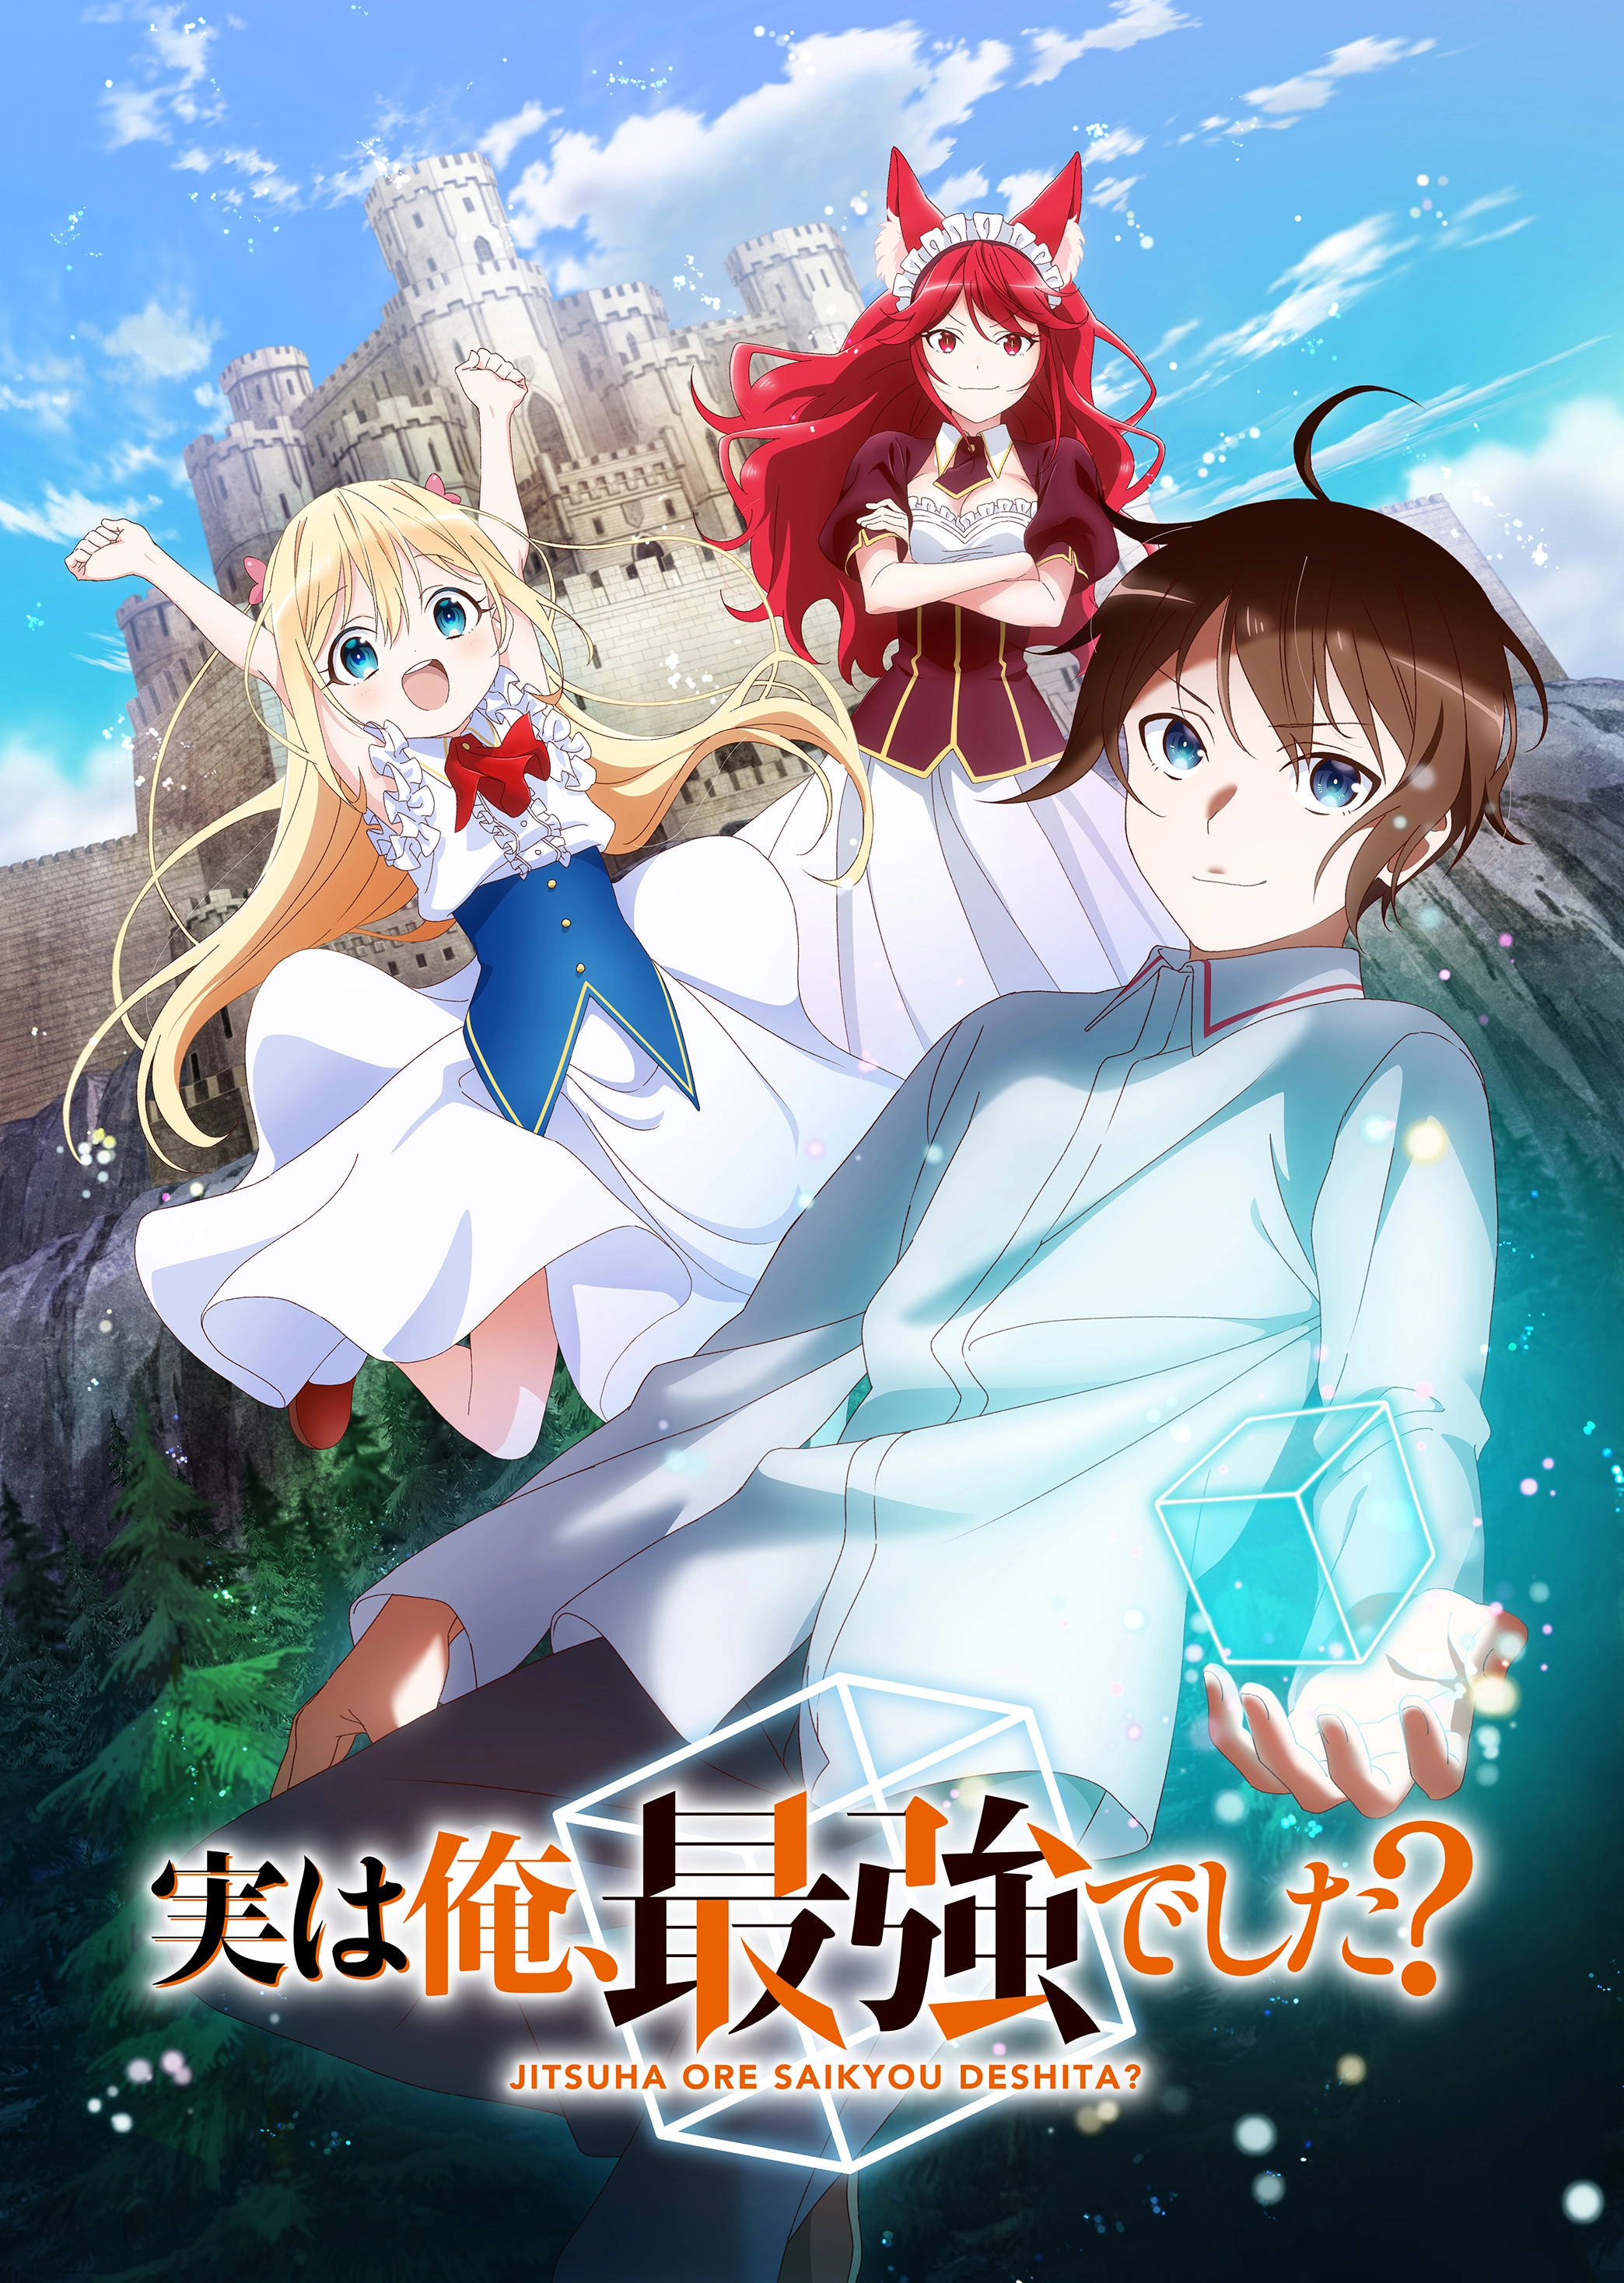 Key visual del anime isekai Am I Actually the Strongest?